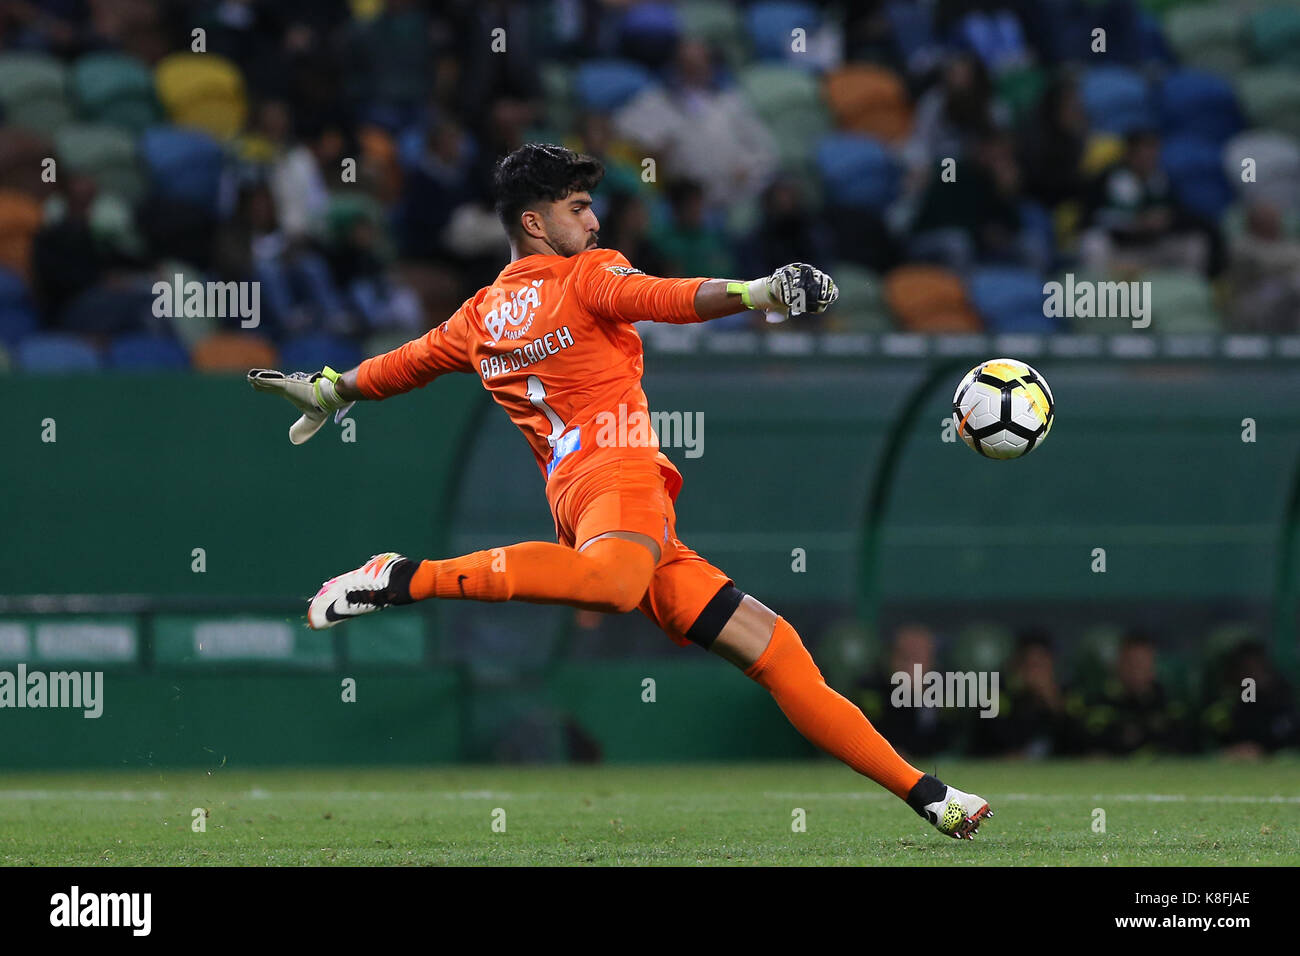 Lisbon, Portugal. 19th Sep, 2017. Maritimo's goalkeeper Amir Abedzadeh from Iran during the Portuguese Cup 2017/18 match between Sporting CP v CS Maritimo, at Alvalade Stadium in Lisbon on September 19, 2017. Credit: Bruno Barros/Alamy Live News Stock Photo